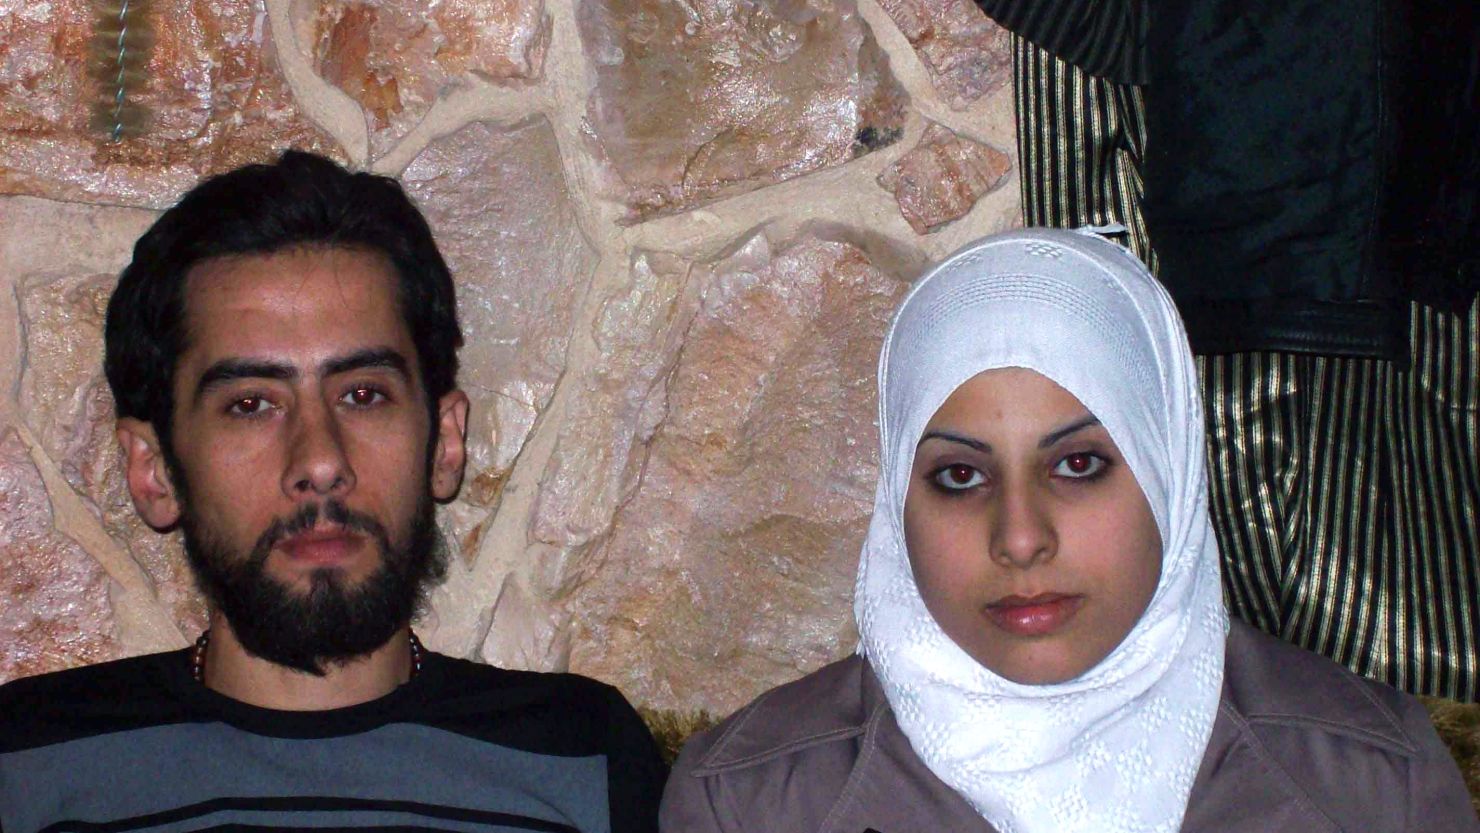 Mohammad Jumbaz and Ayat Al-Qassad were expecting their first child when Ayat was killed. 